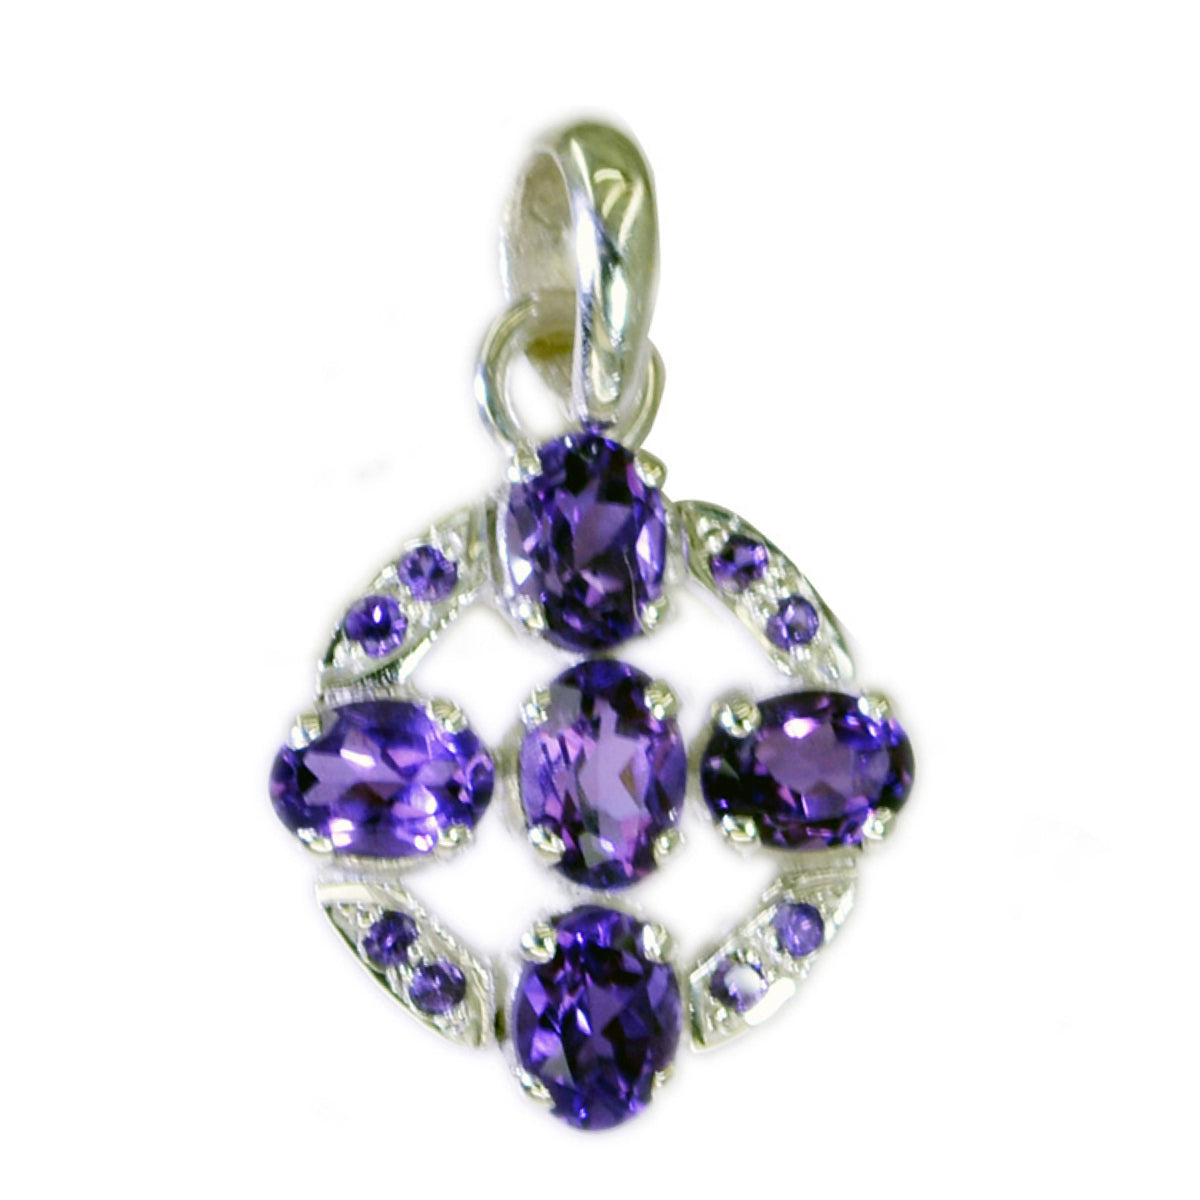 Riyo Alluring Gemstone Oval Faceted Purple Amethyst 1115 Sterling Silver Pendant Gift For Teachers Day